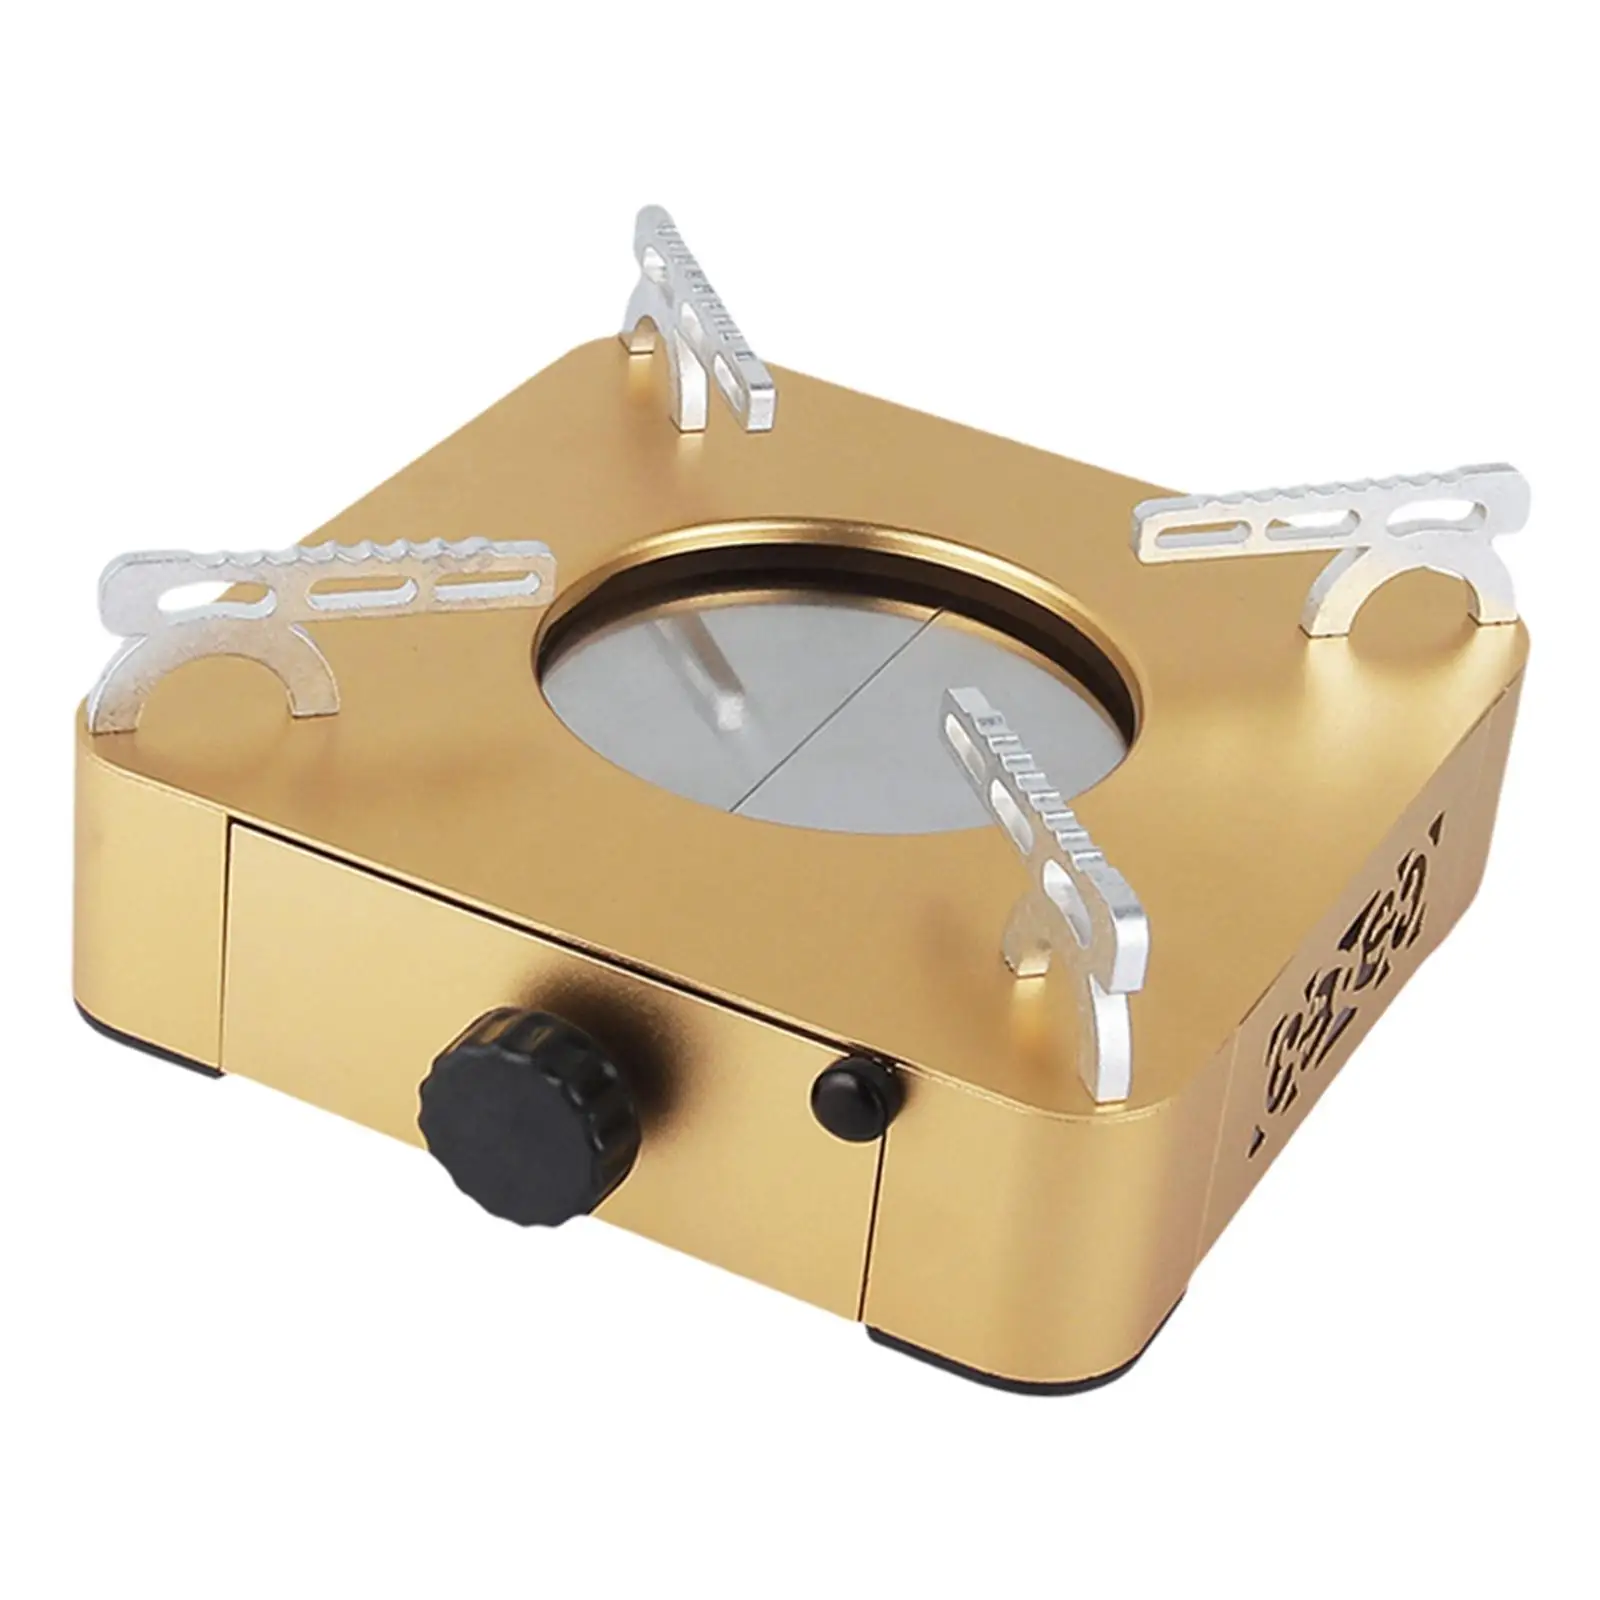 Mini Alcohol Stove Compact Furnace Kitchen Equipment Spirit Burner for Camping